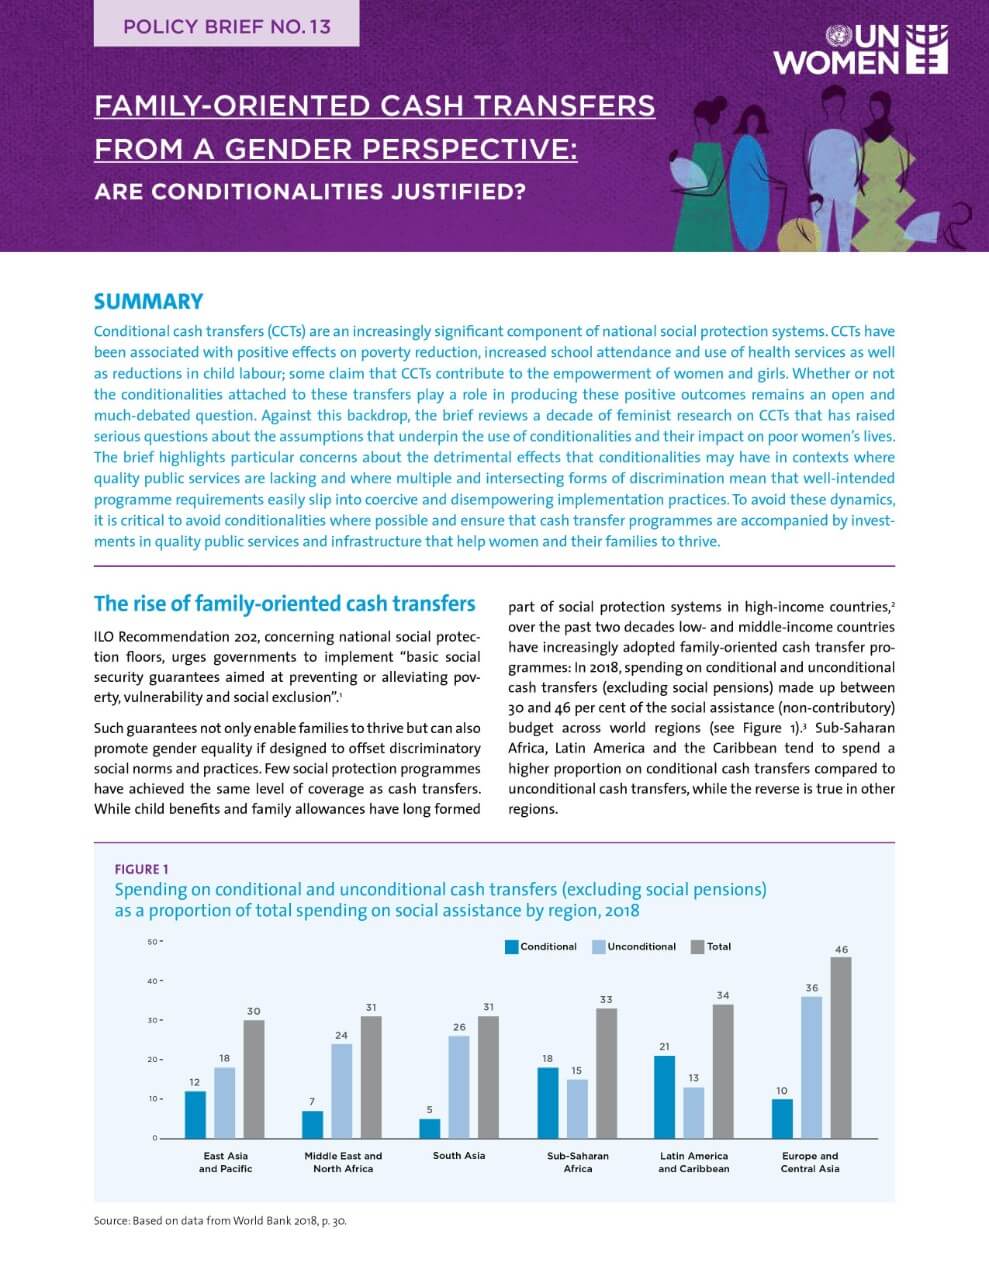 Policy brief: Family-oriented cash transfers from a gender perspective: Are conditionalities justified?